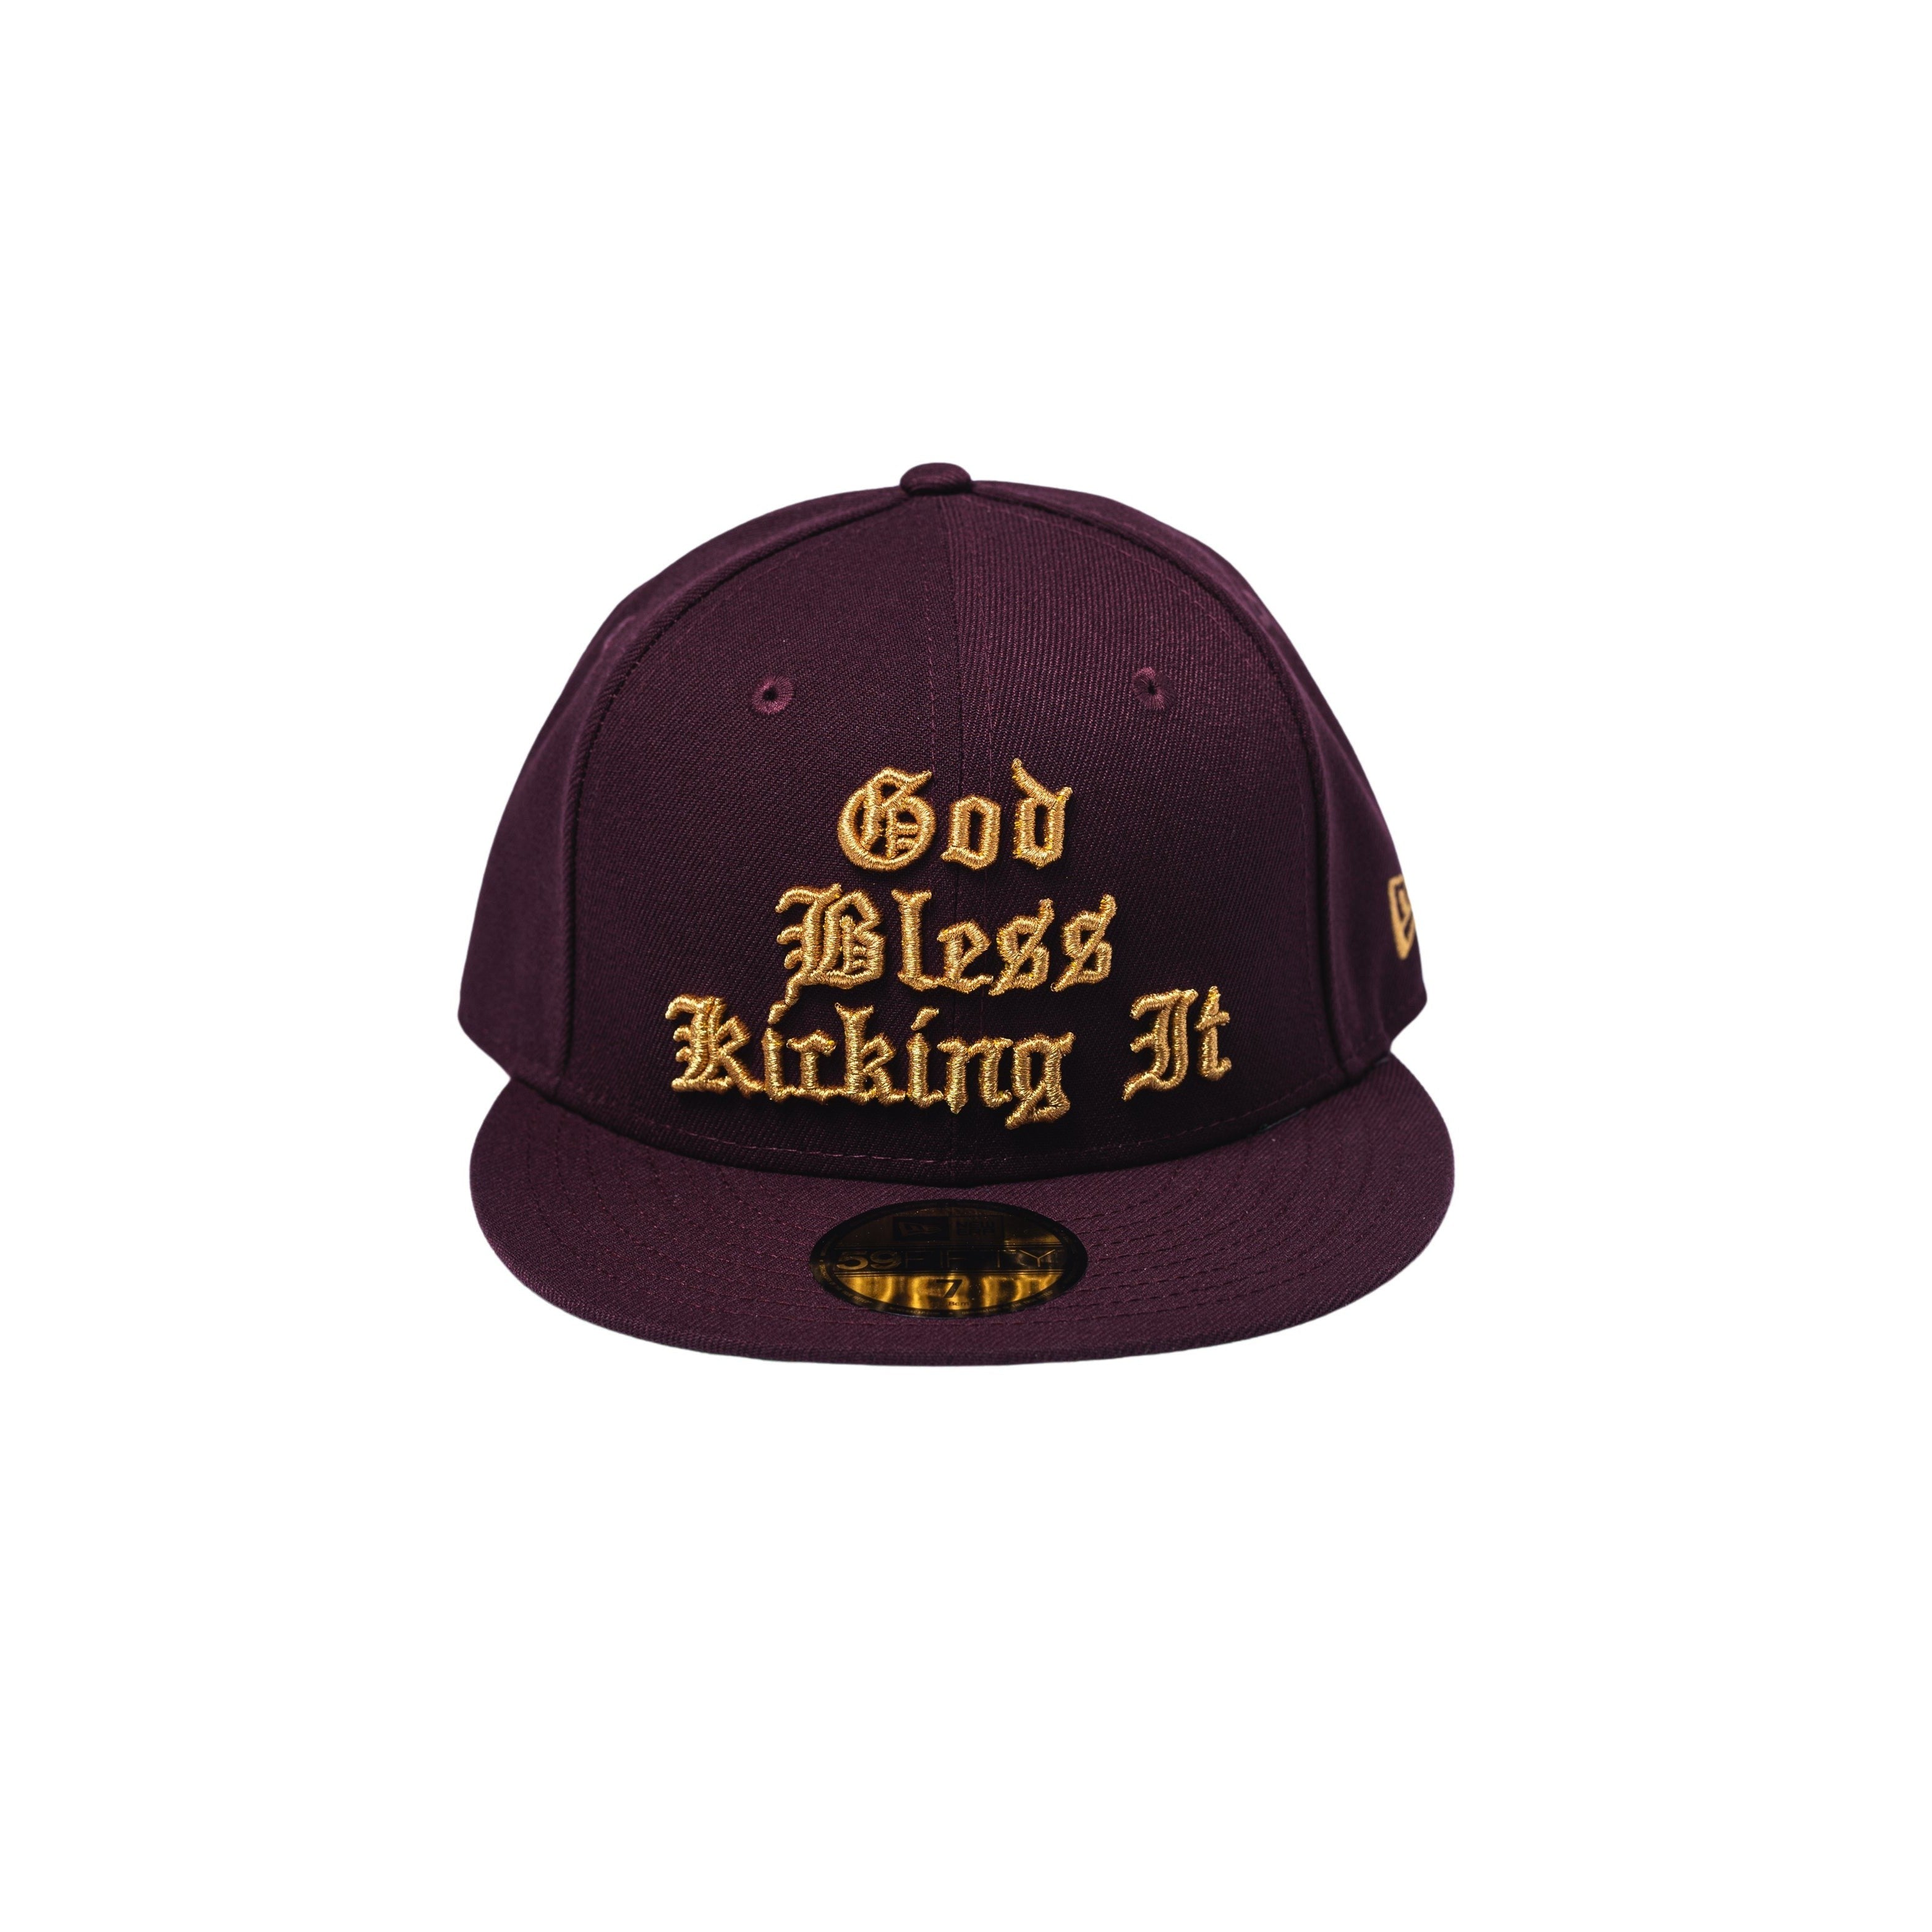 God Bless Kicking It Fitted Cap